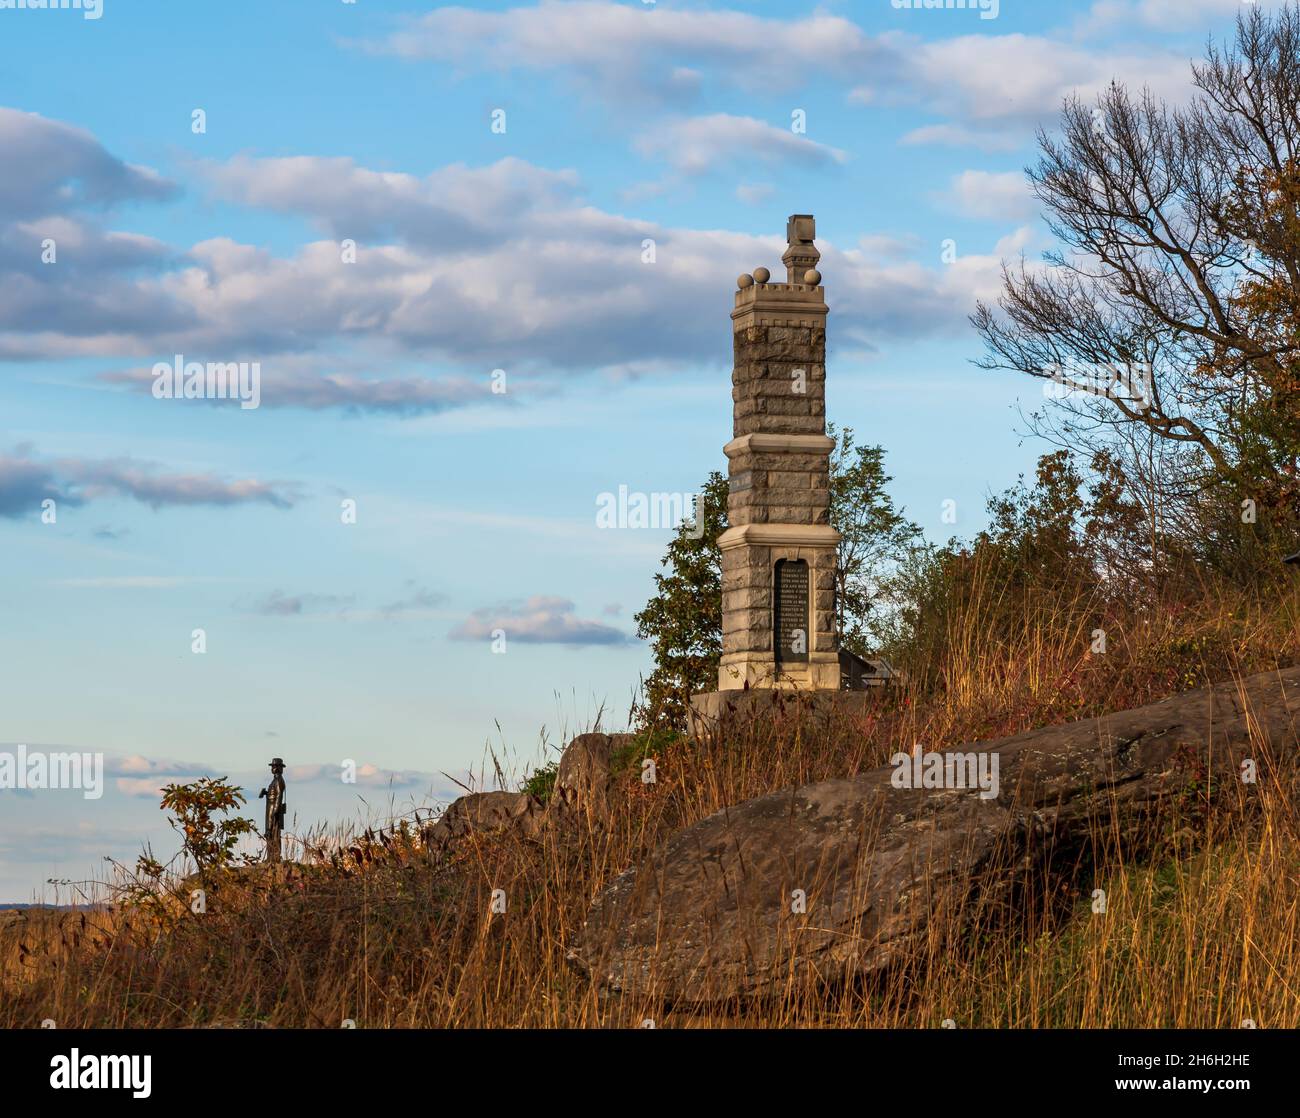 The monument to the 91st Pennsylvania Volunteer Infantry Regiment and Brigadier General Gouverneur Kemble Warren on Little Round Top in Gettysburg N.P Stock Photo